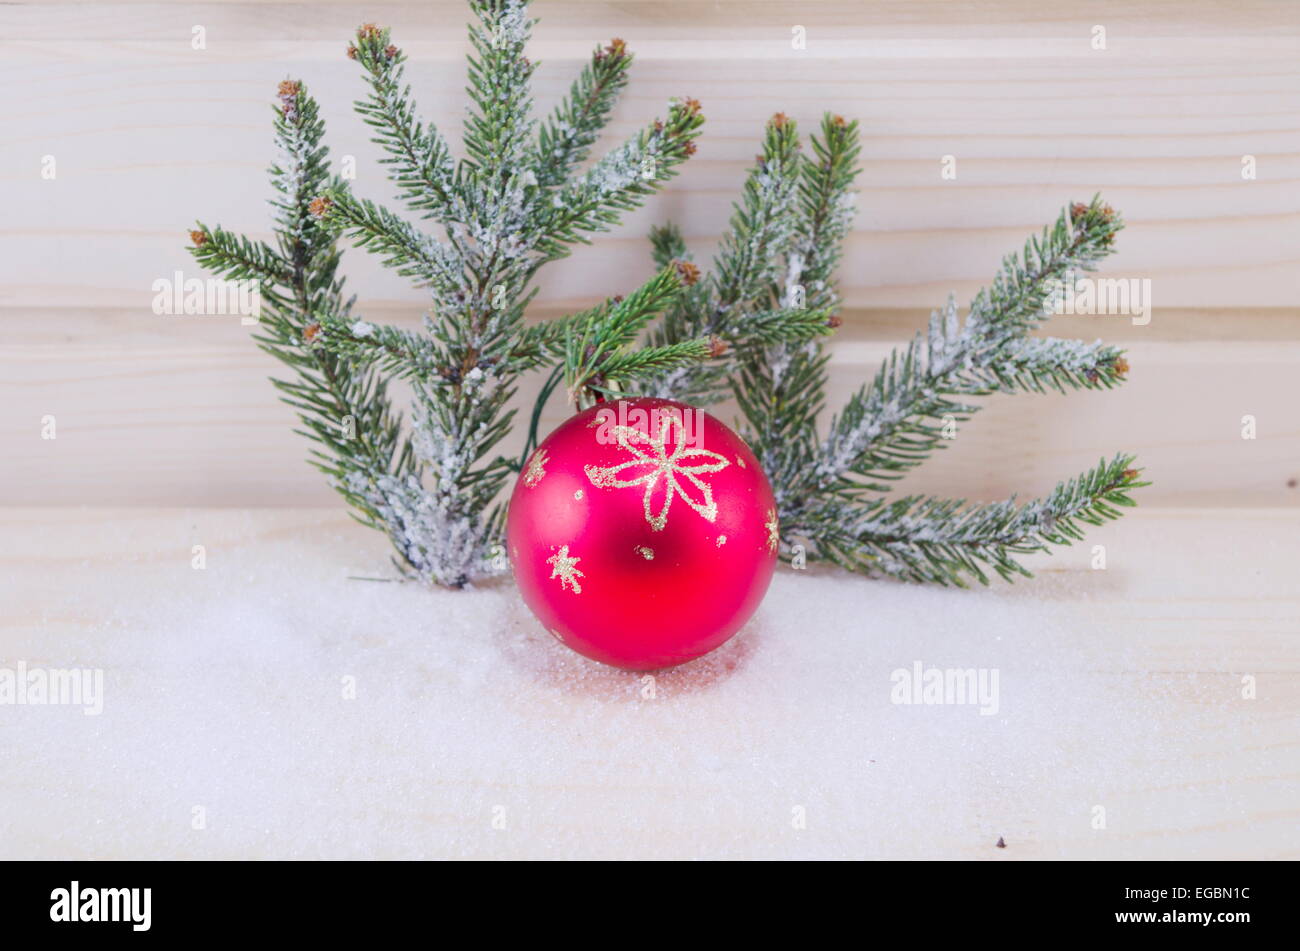 Red Christmas ornament and a fir tree covered with snow, on a wooden surface Stock Photo